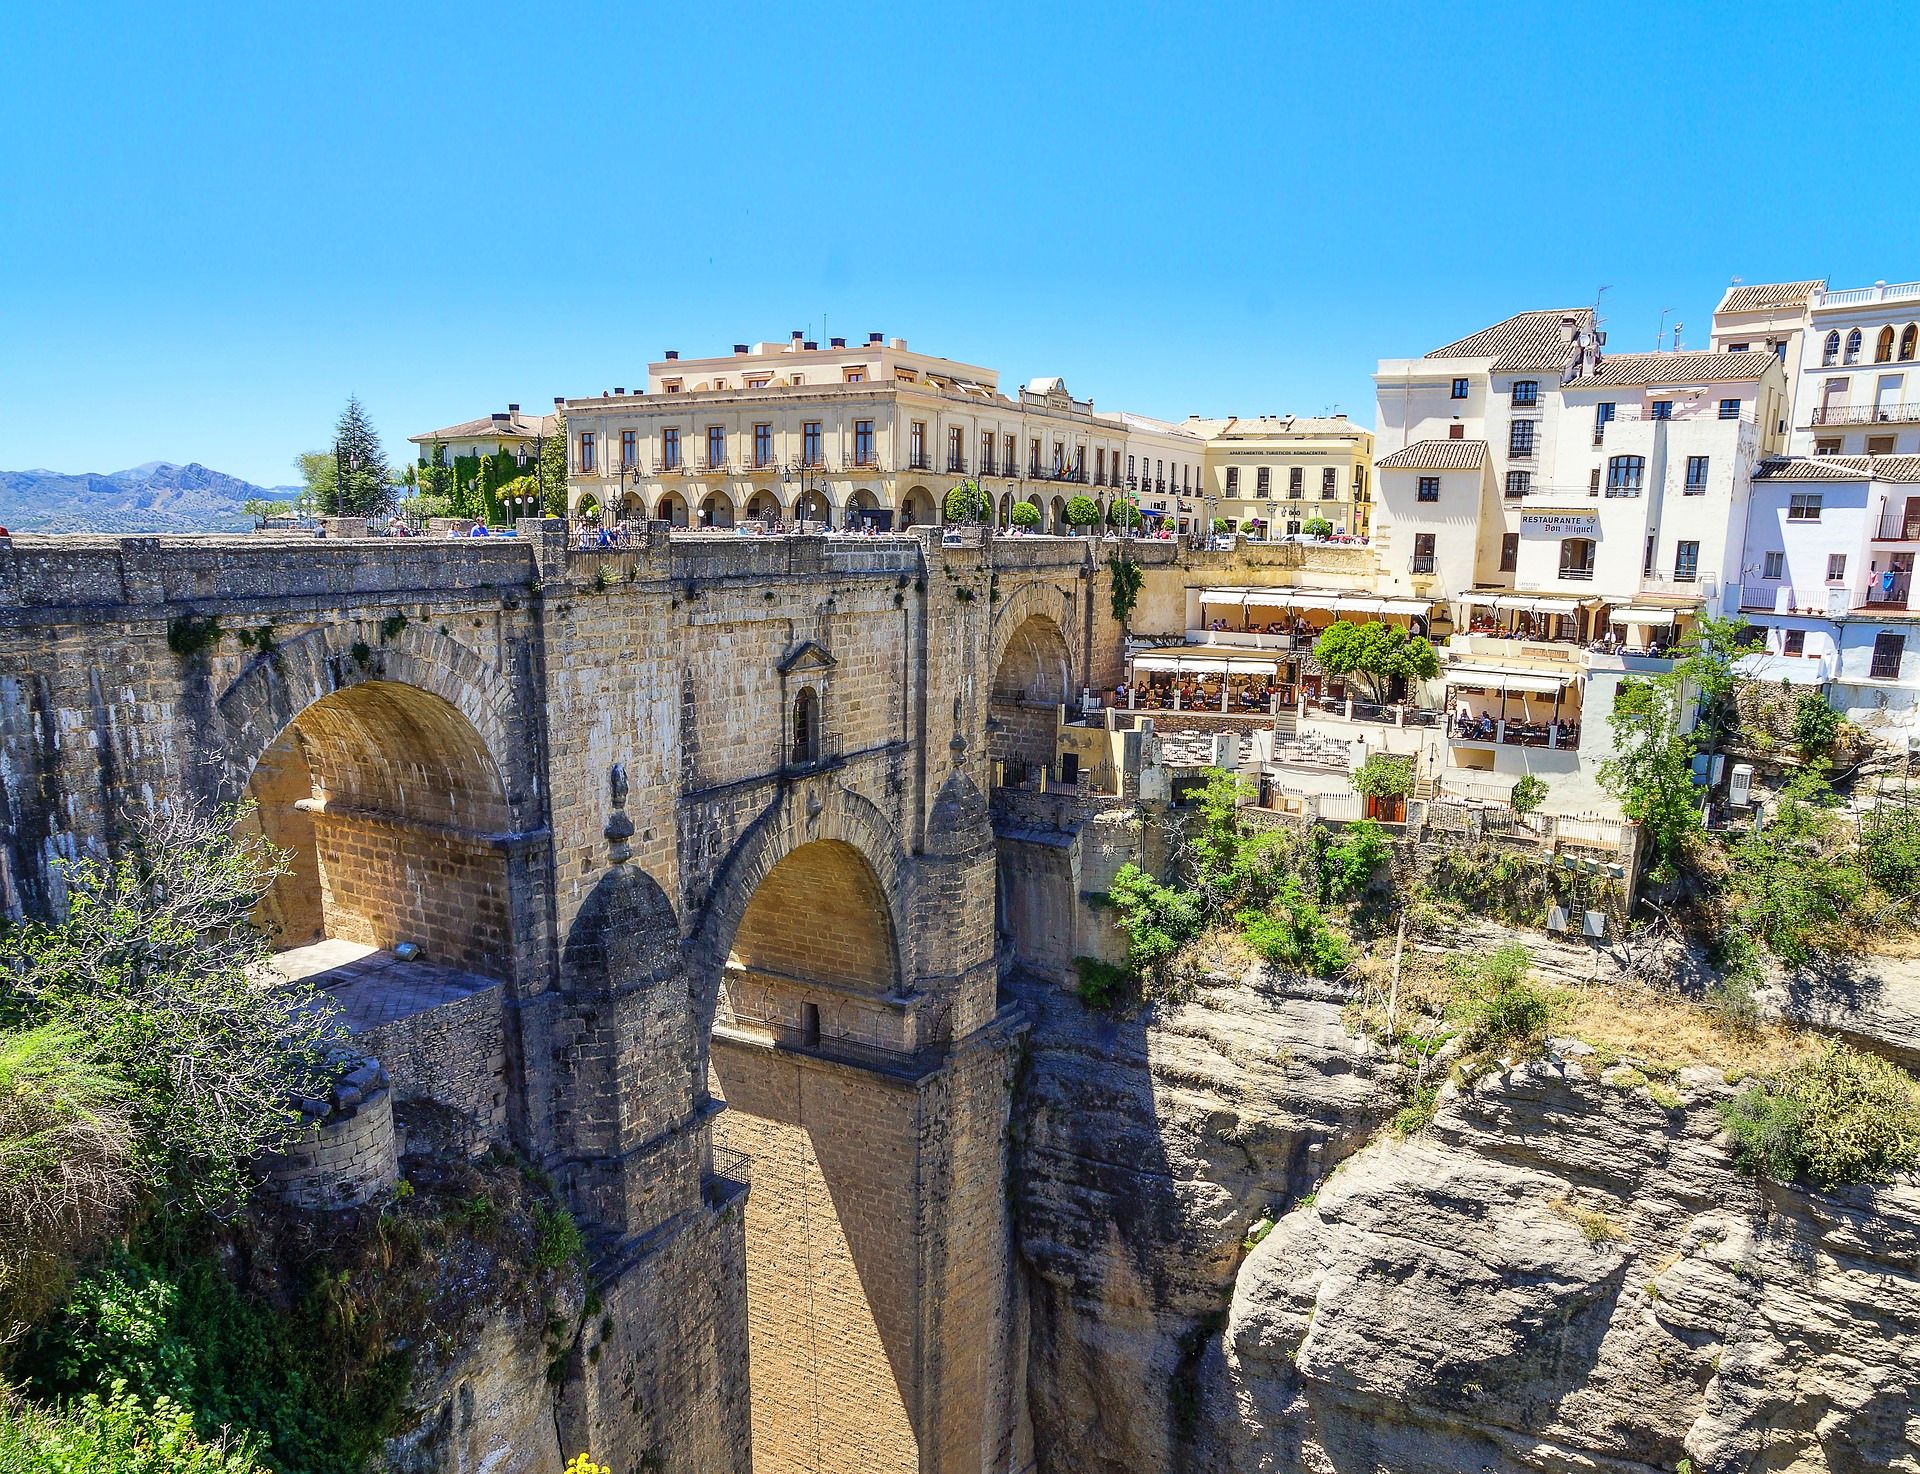 Ronda in Malaga Province is the happiest town in Spain